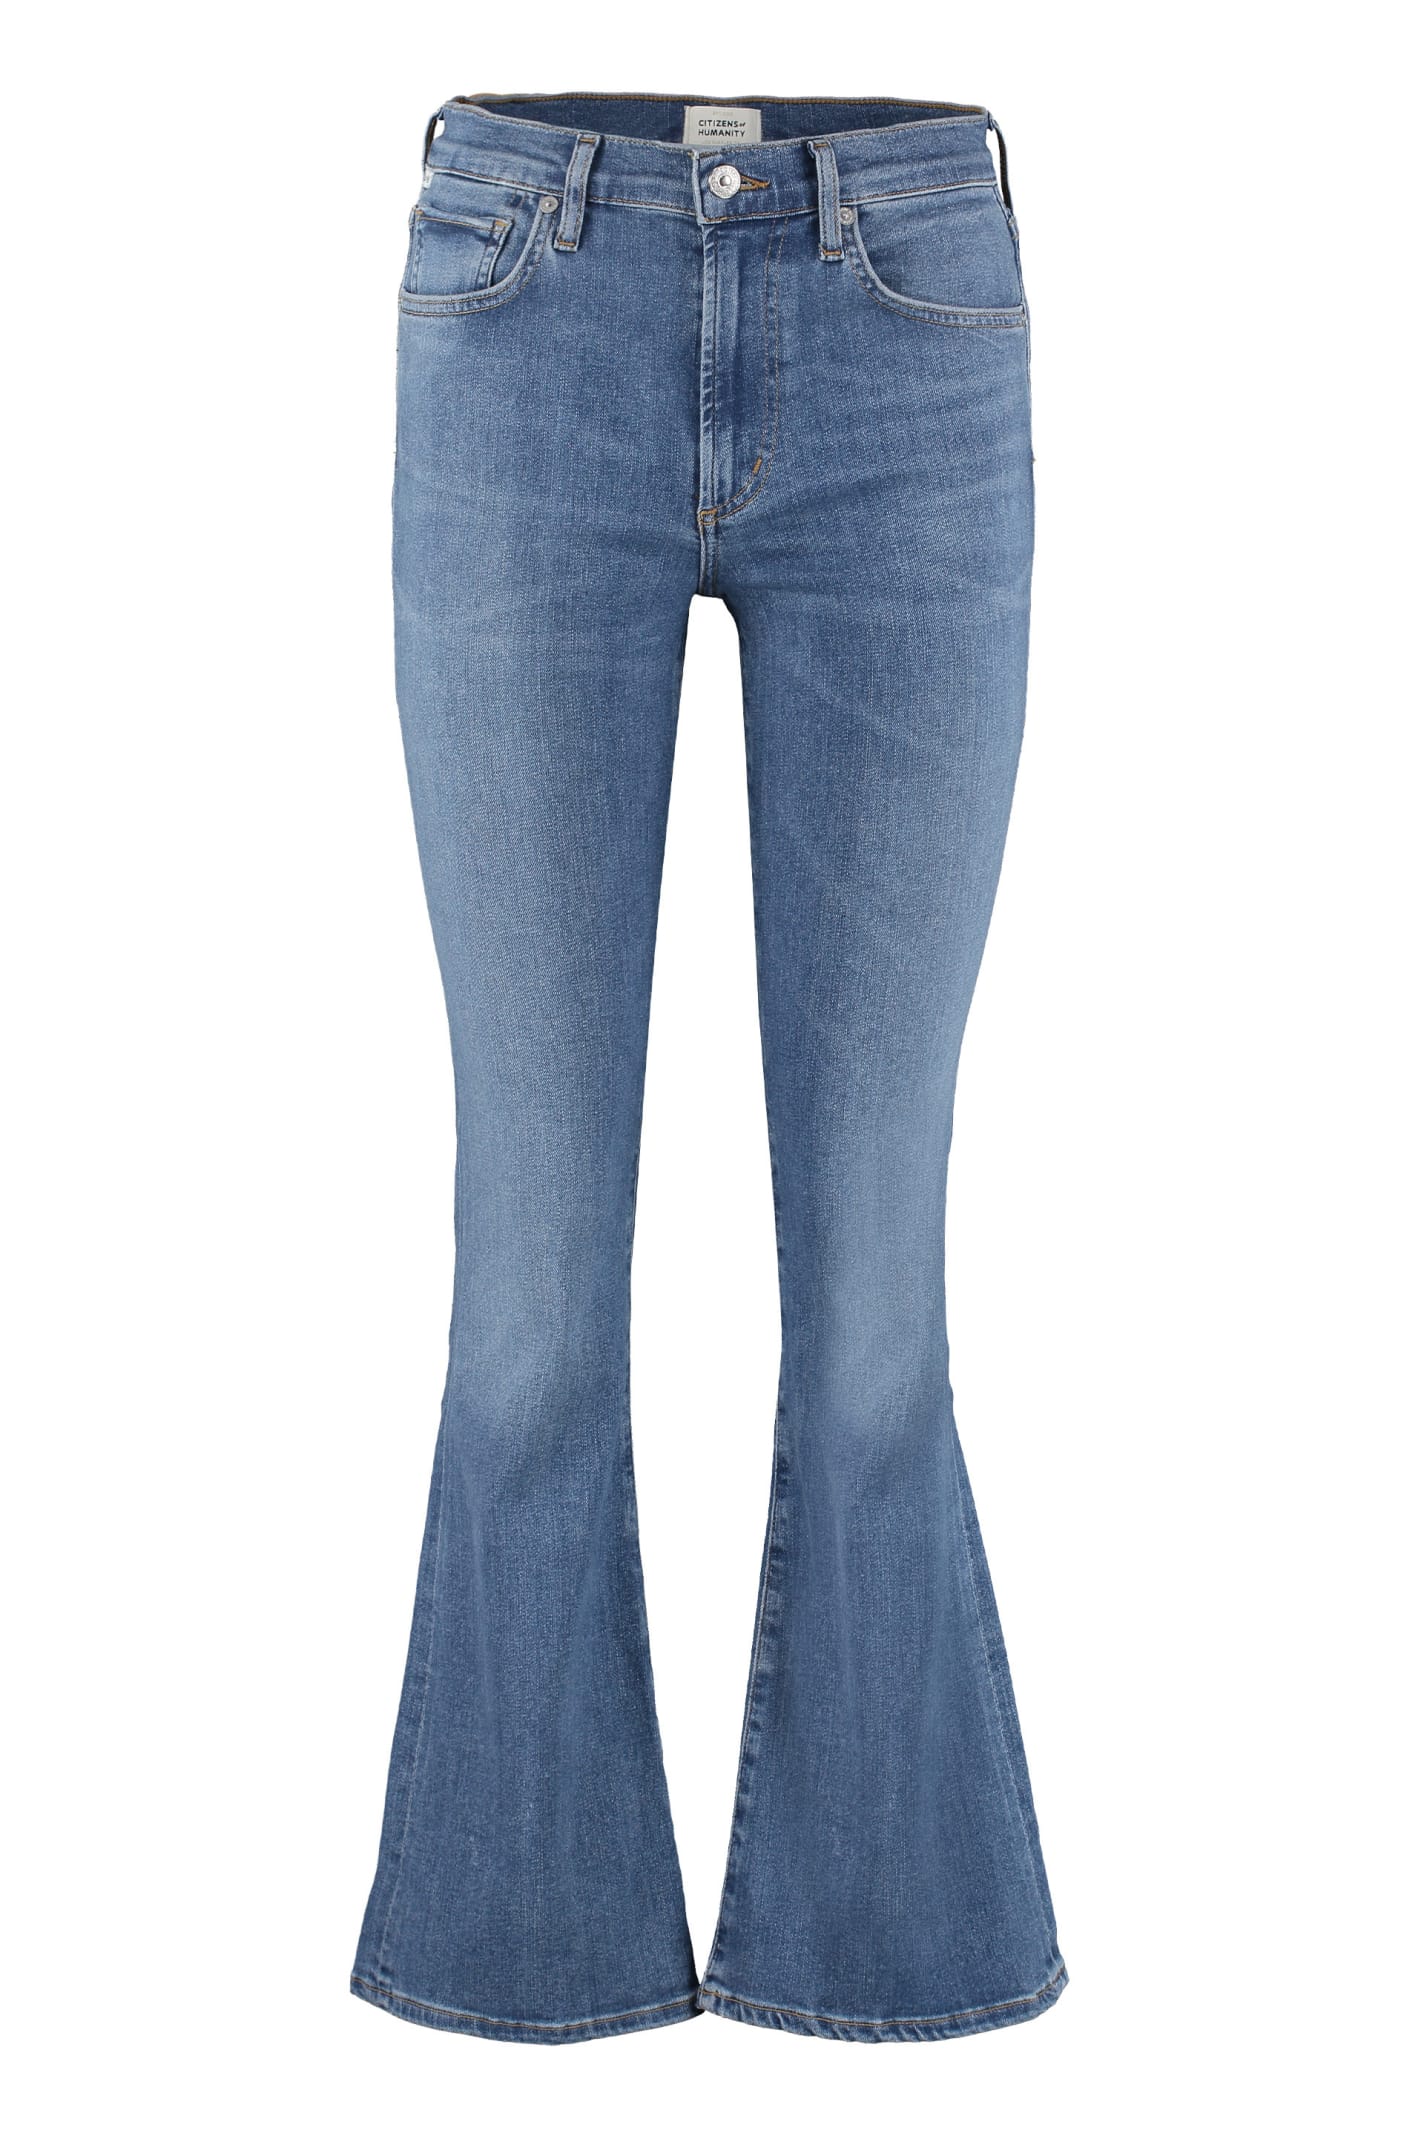 Citizens of Humanity Emannuelle Flared-slim Jeans